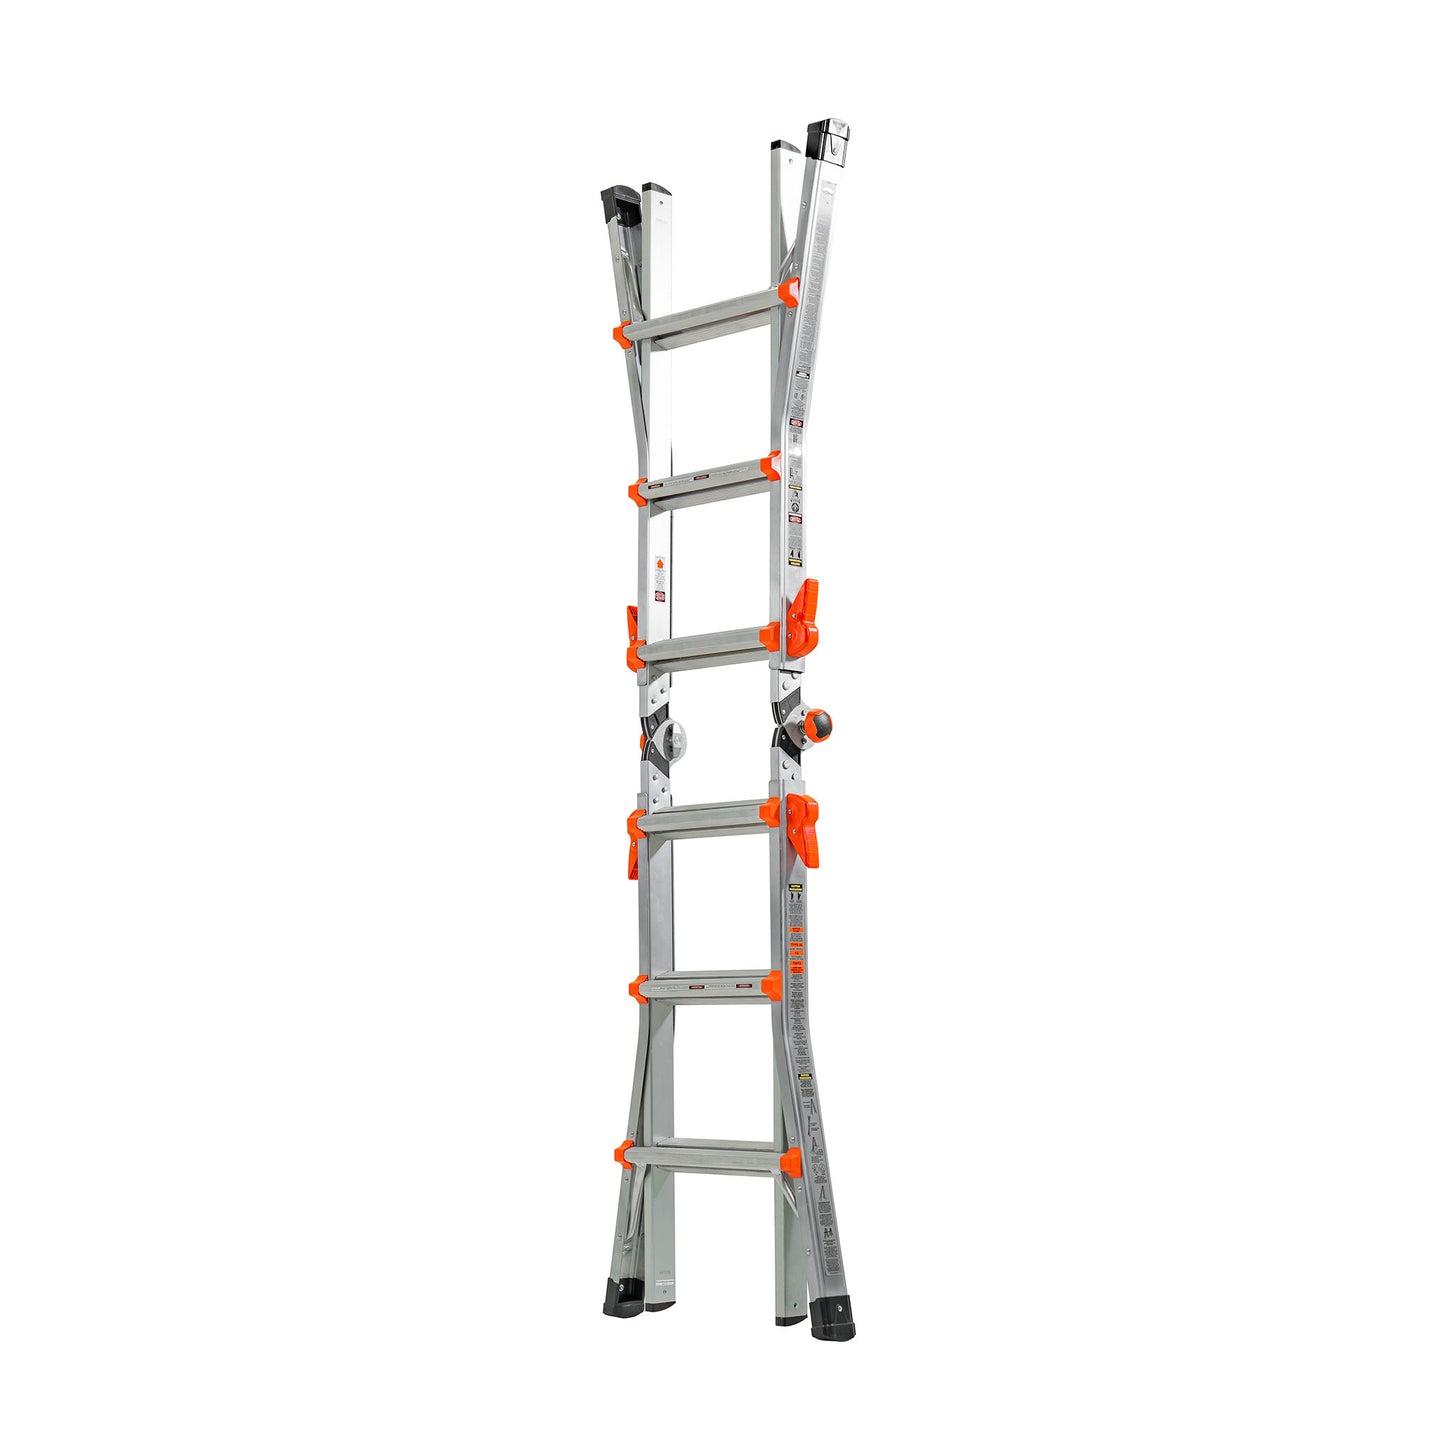 Little Giant™ 3.3m (3 Step) Ladder System Special